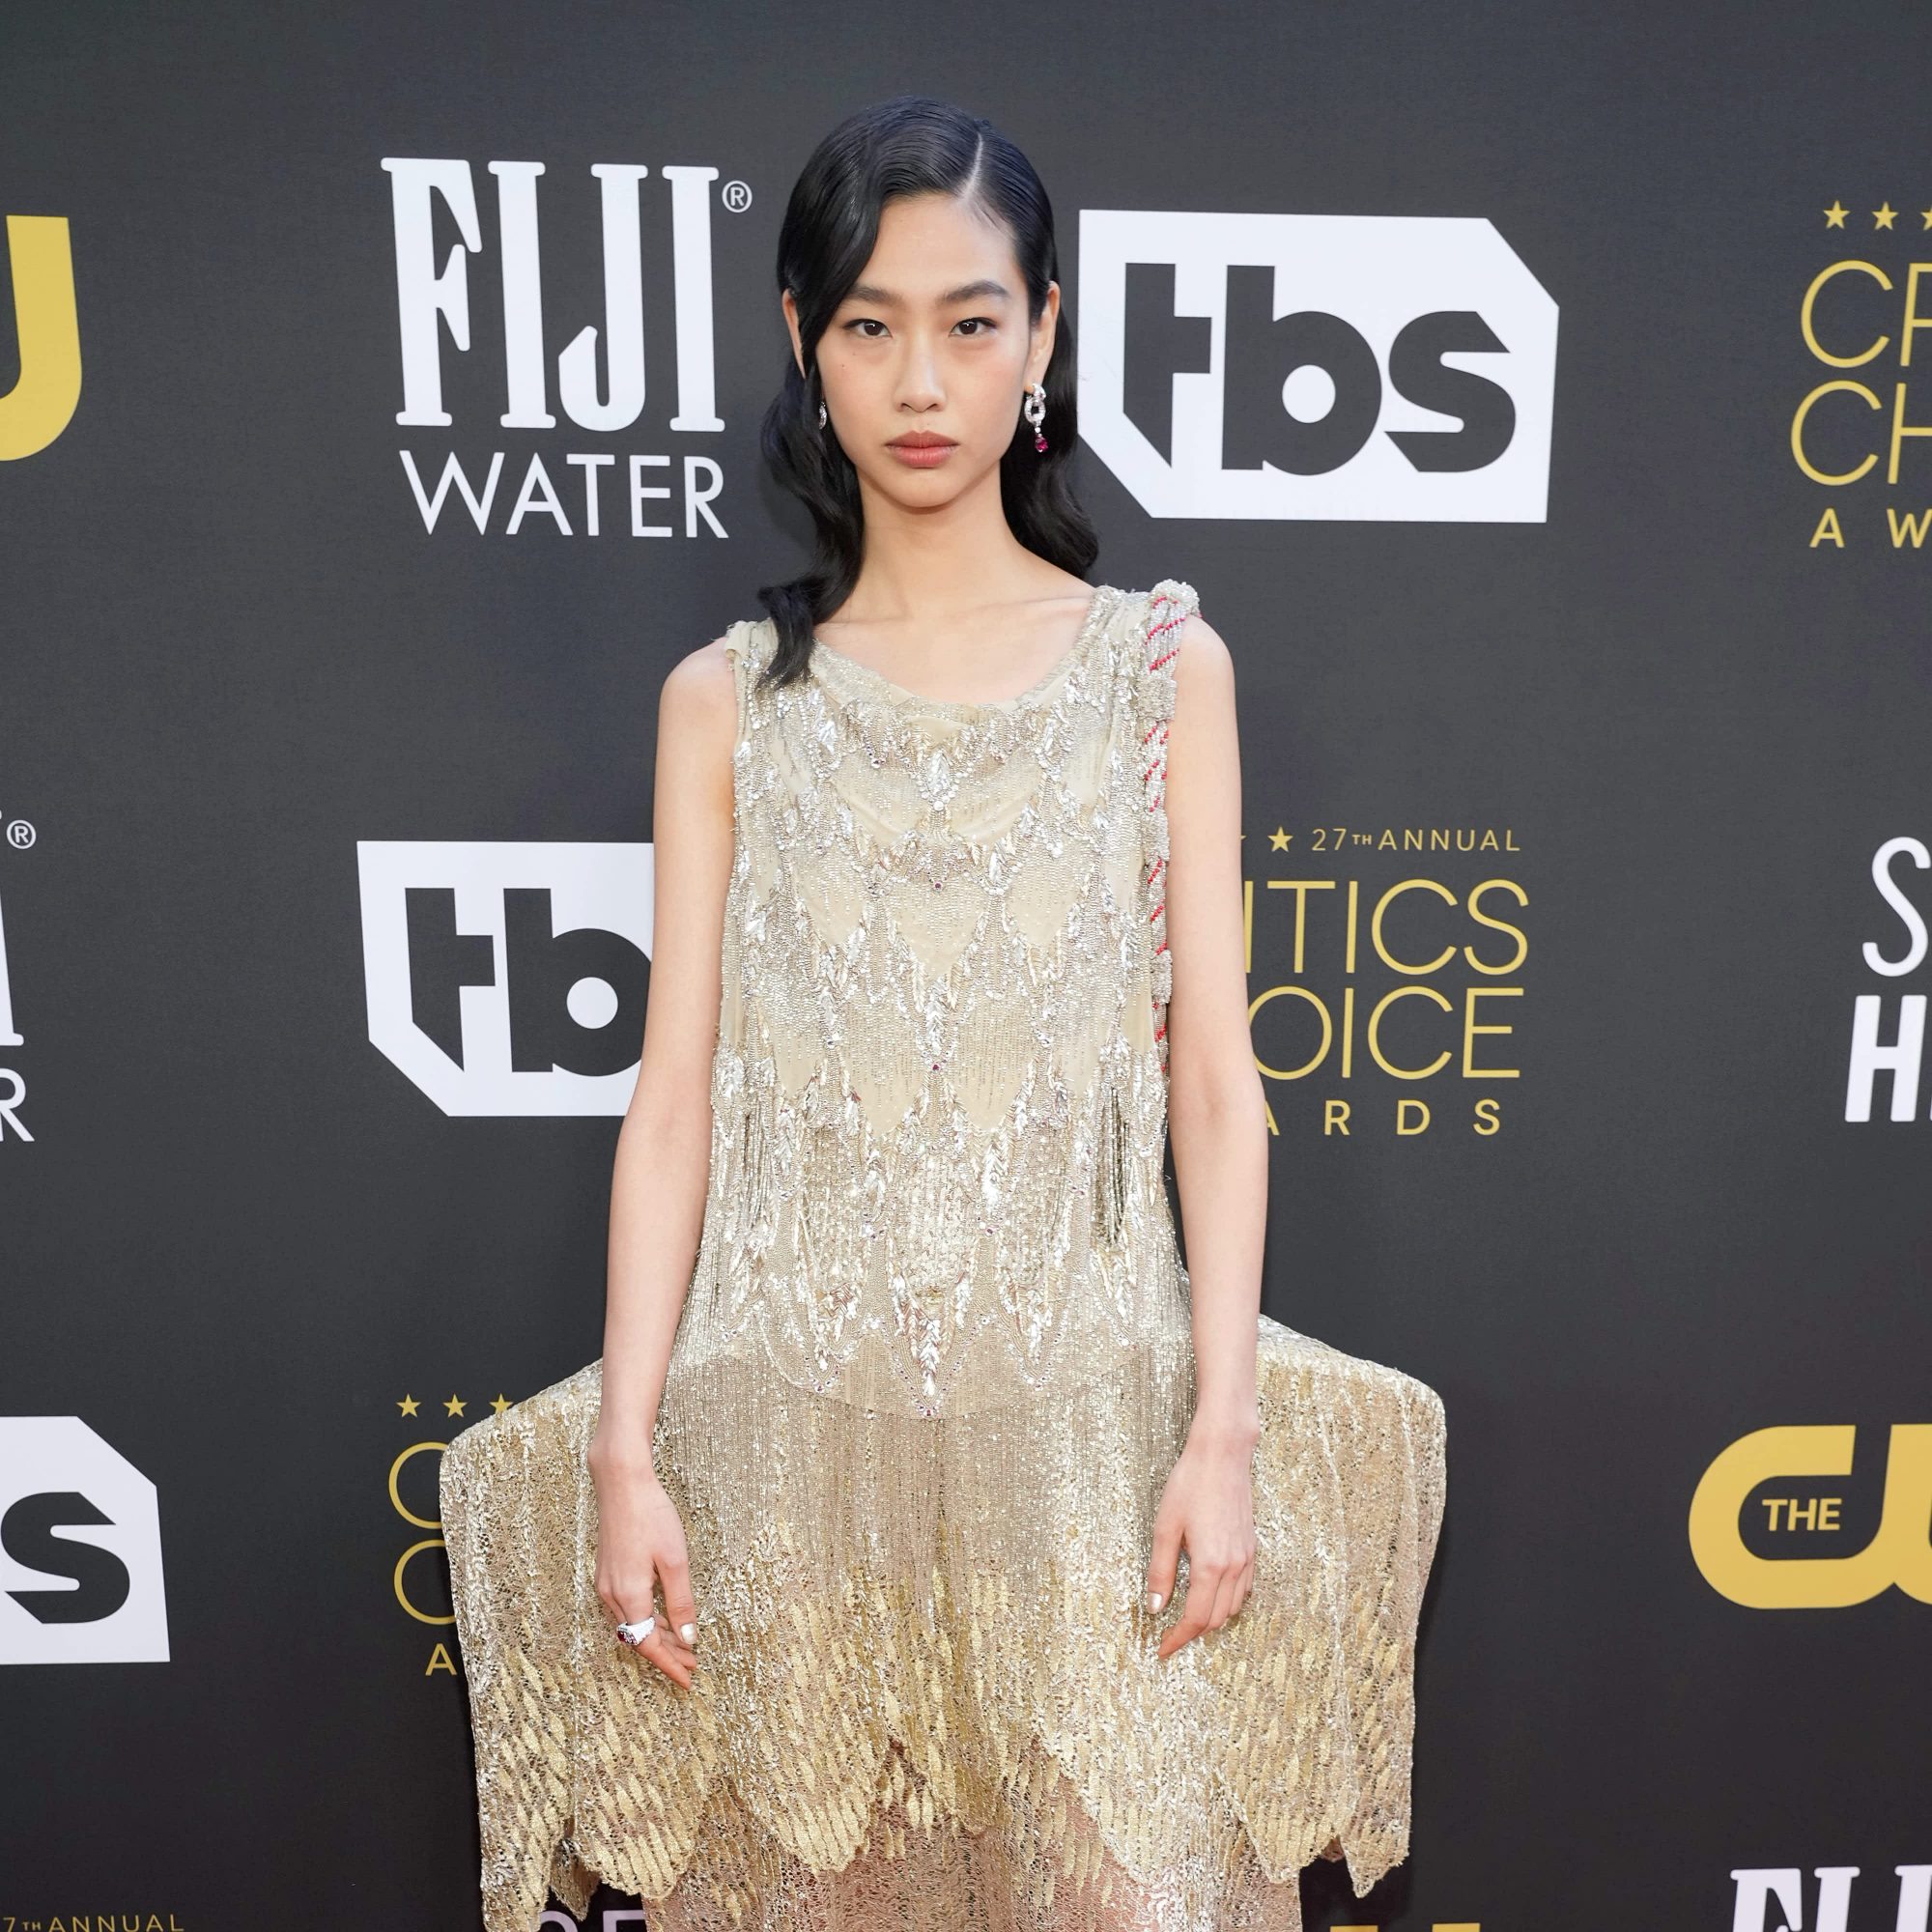 These Critics' Choice Awards Red Carpet Looks Will Make You Stop and ...